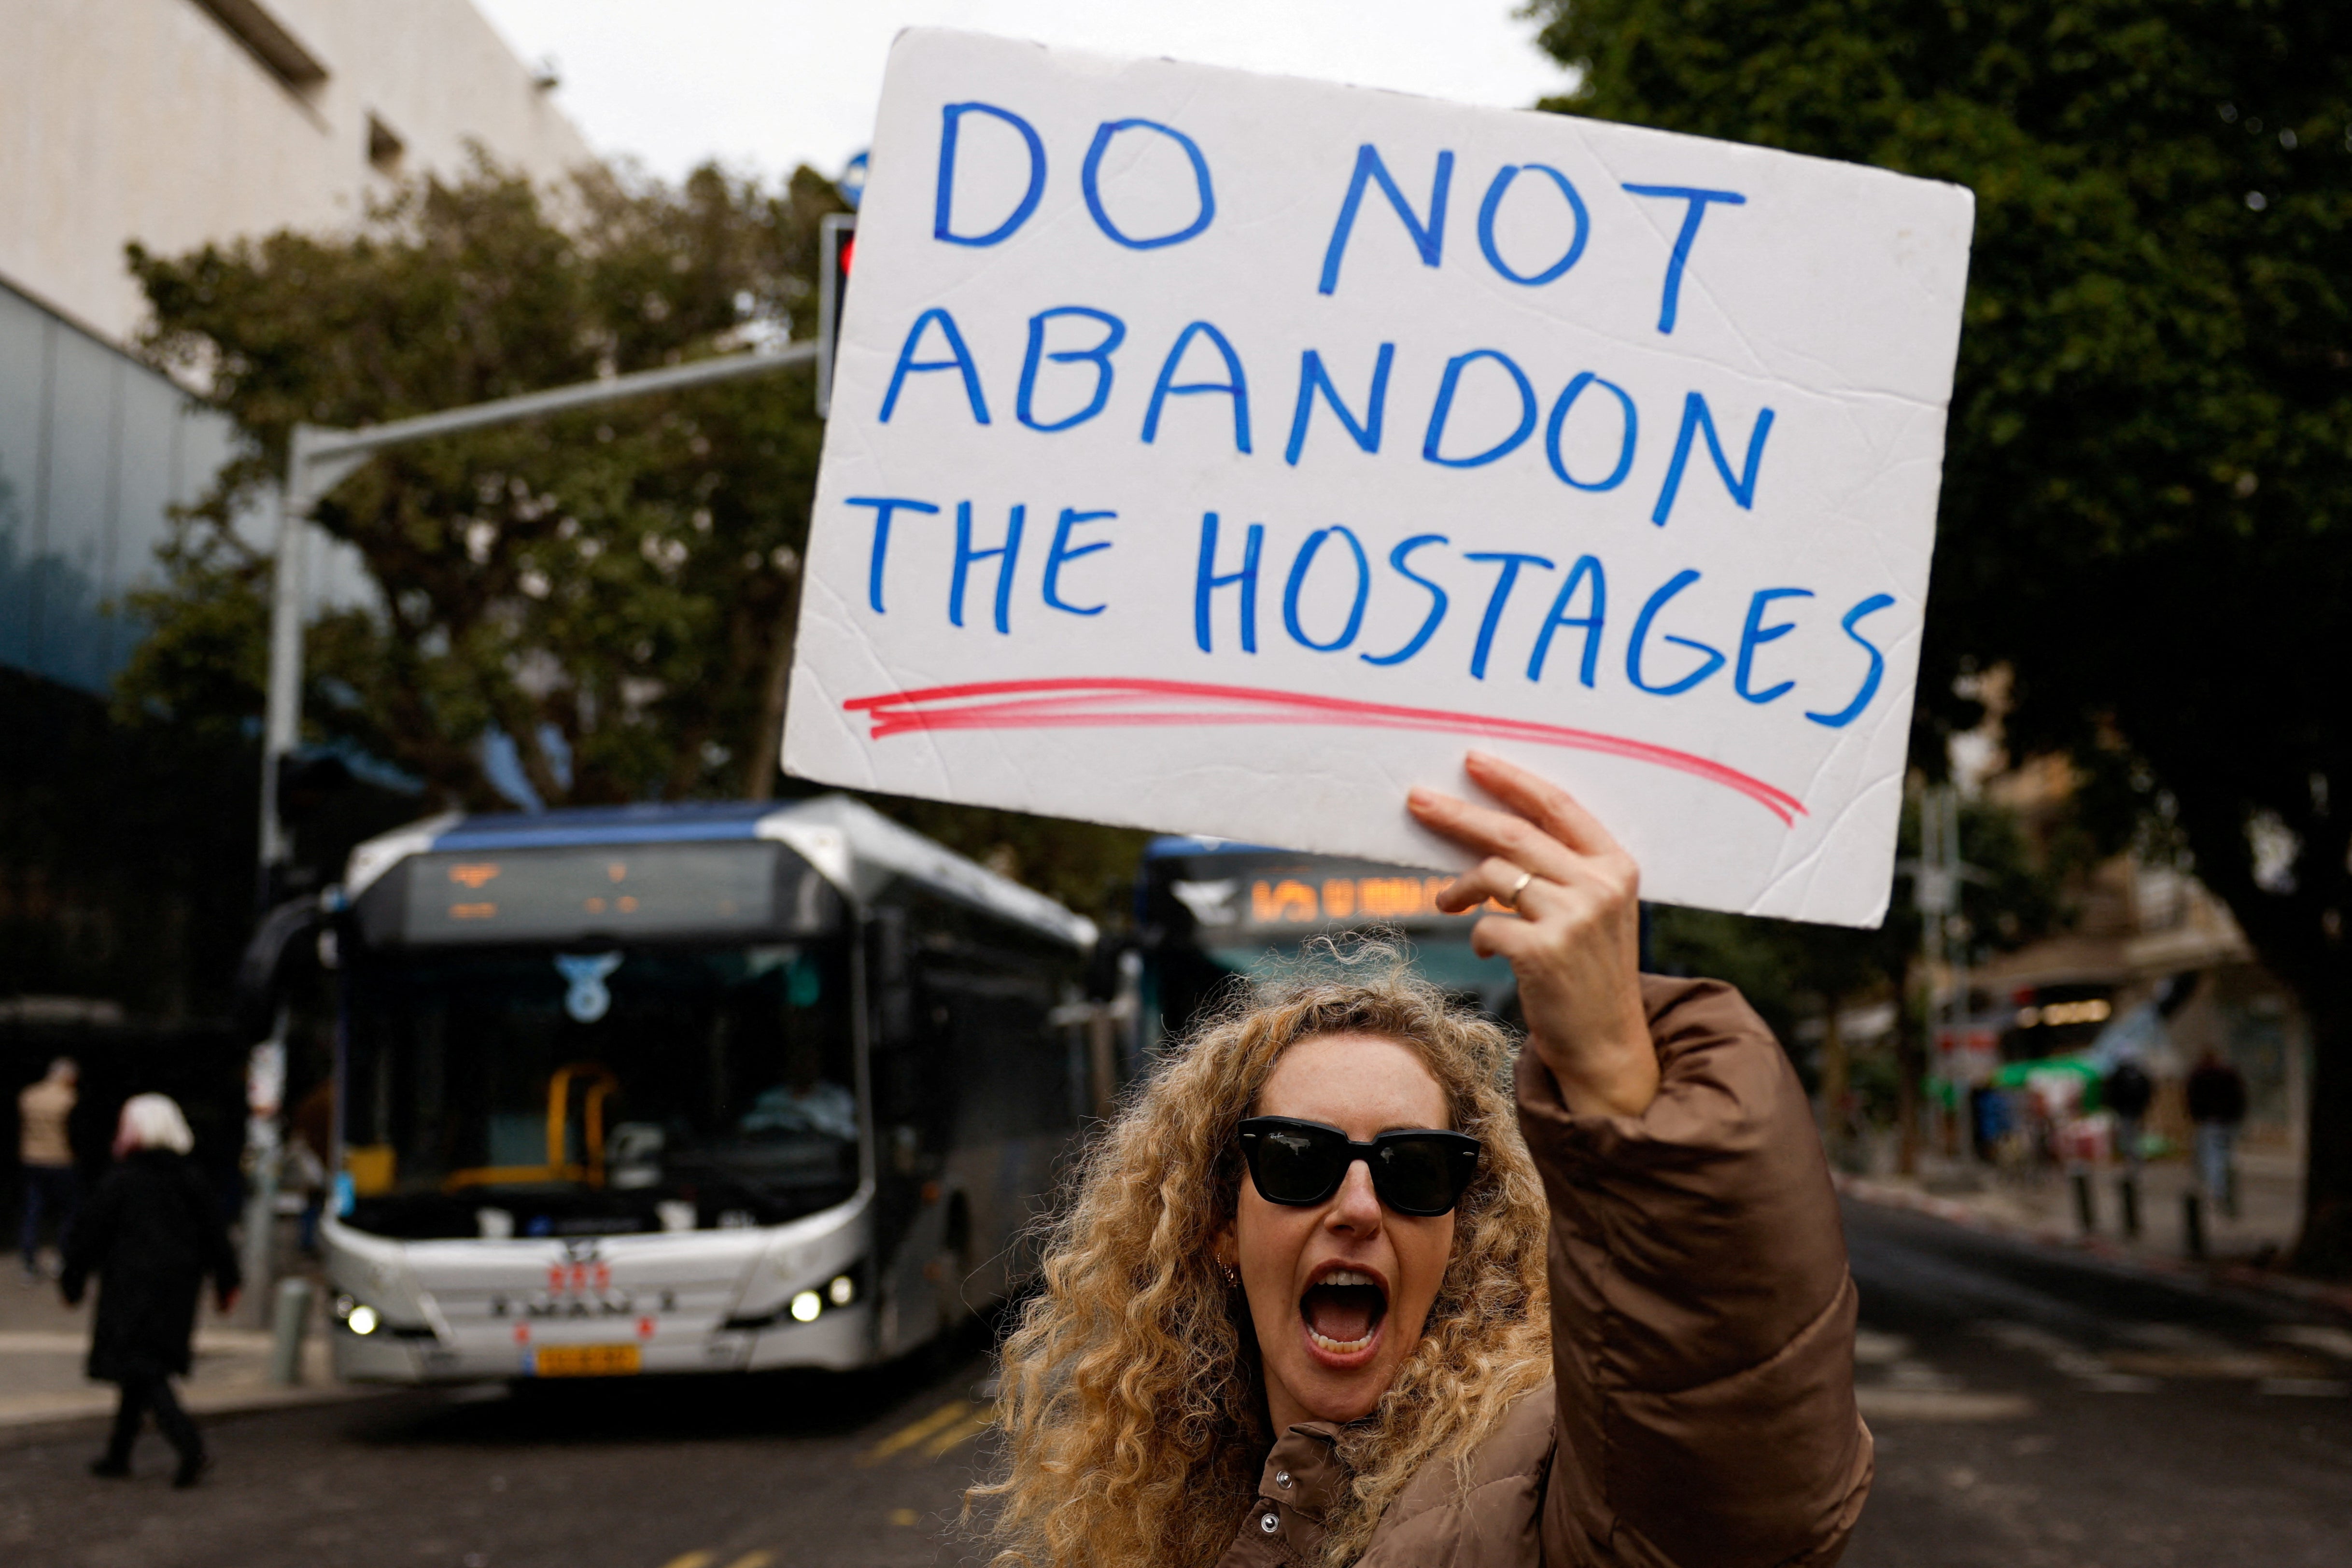 A woman takes part in a protest demanding a hostage deal in Tel Aviv earlier this month